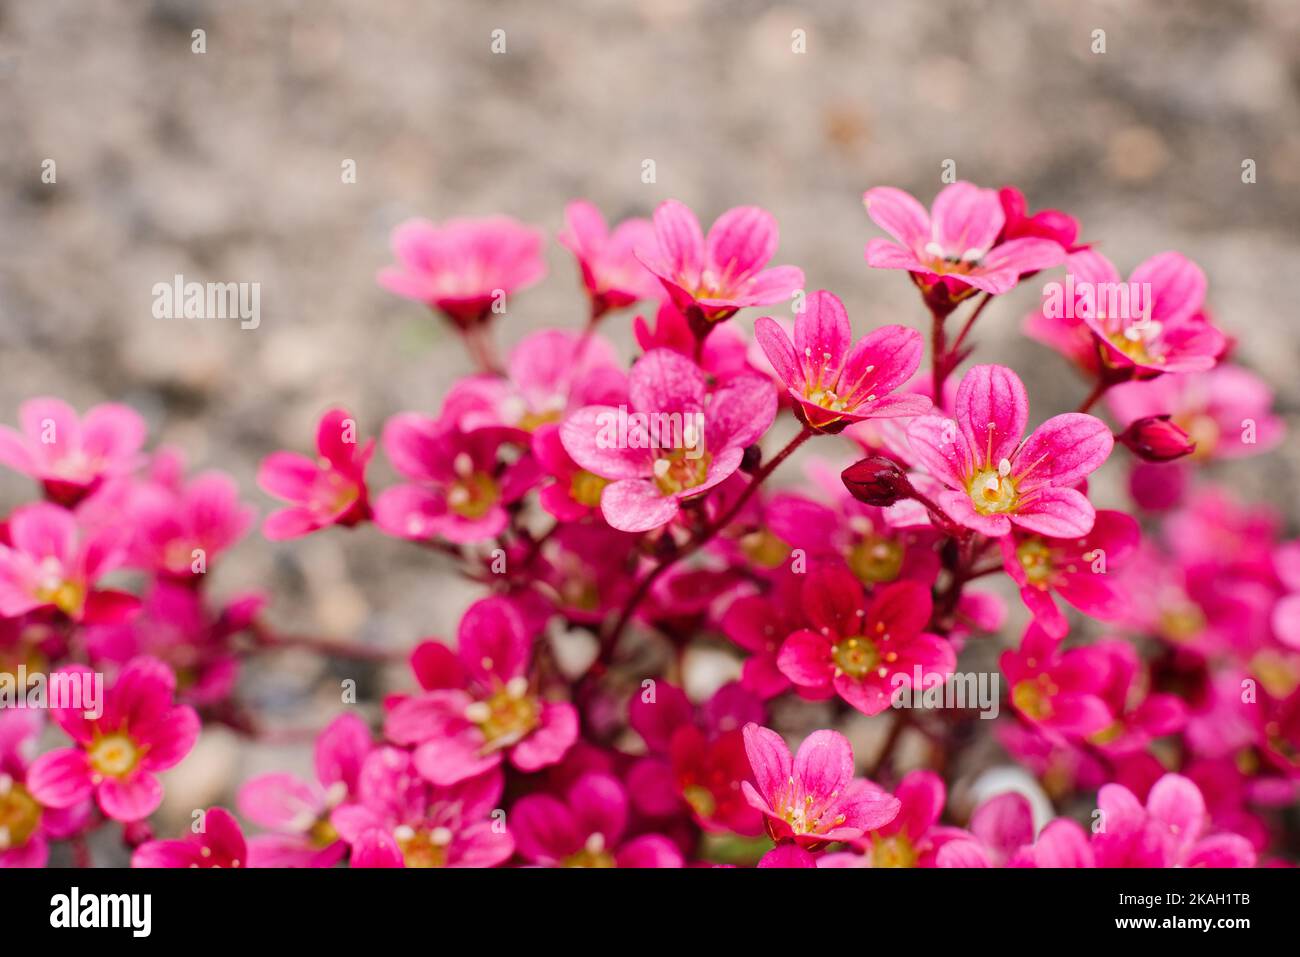 Bright red Saxifraga flowers in spring in the garden close-up Stock Photo